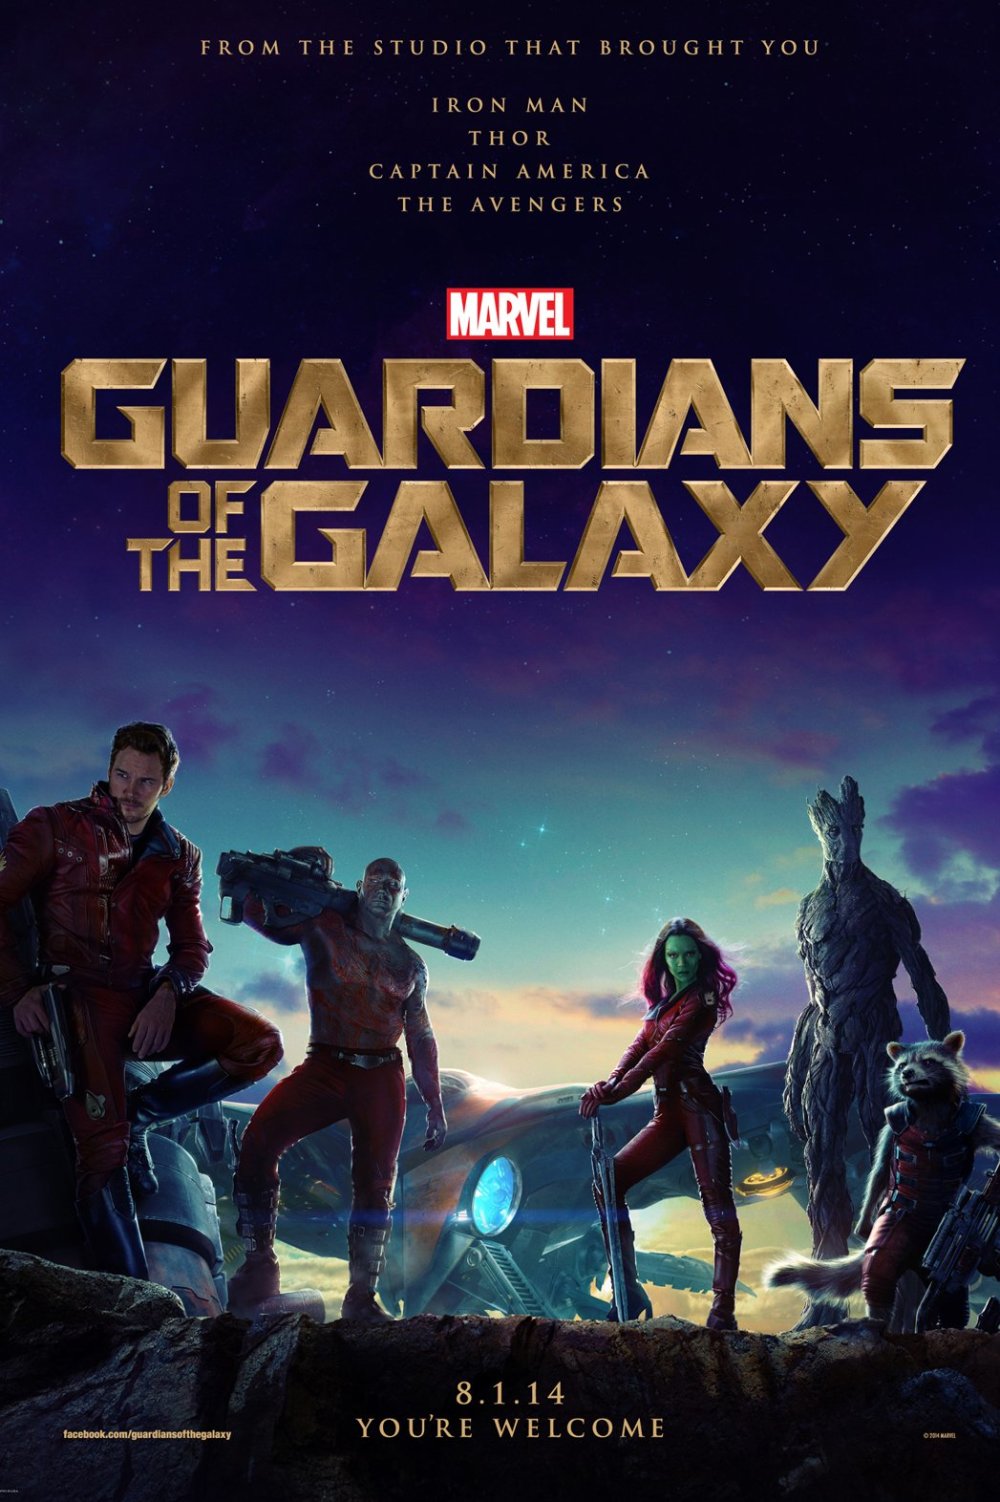 'Guardians of the Galaxy' flopt in China